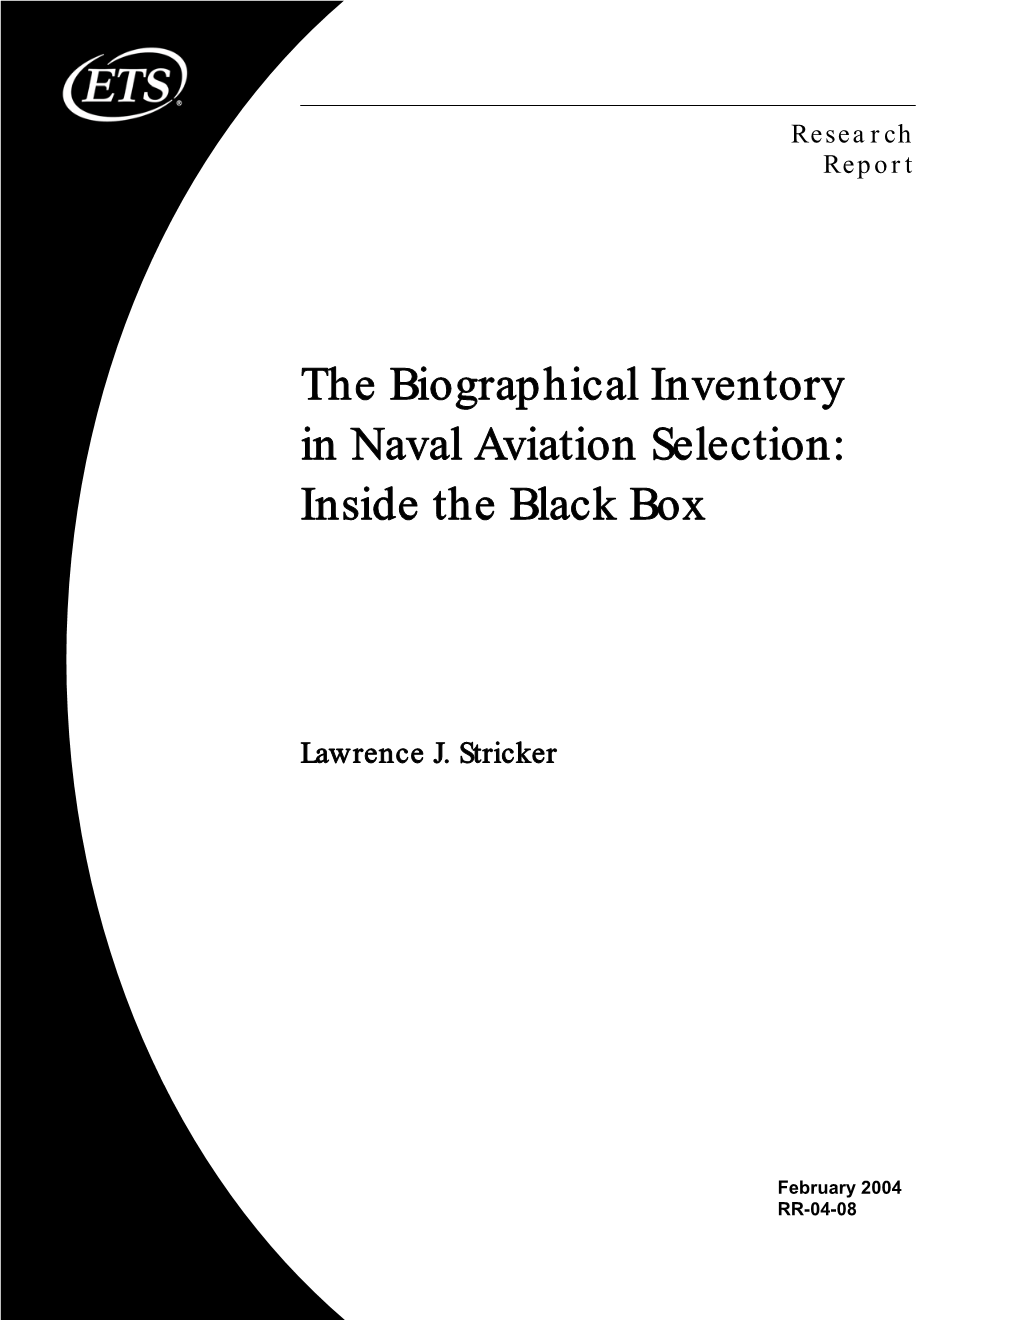 The Biographical Inventory in Naval Aviation Selection: Inside the Black Box